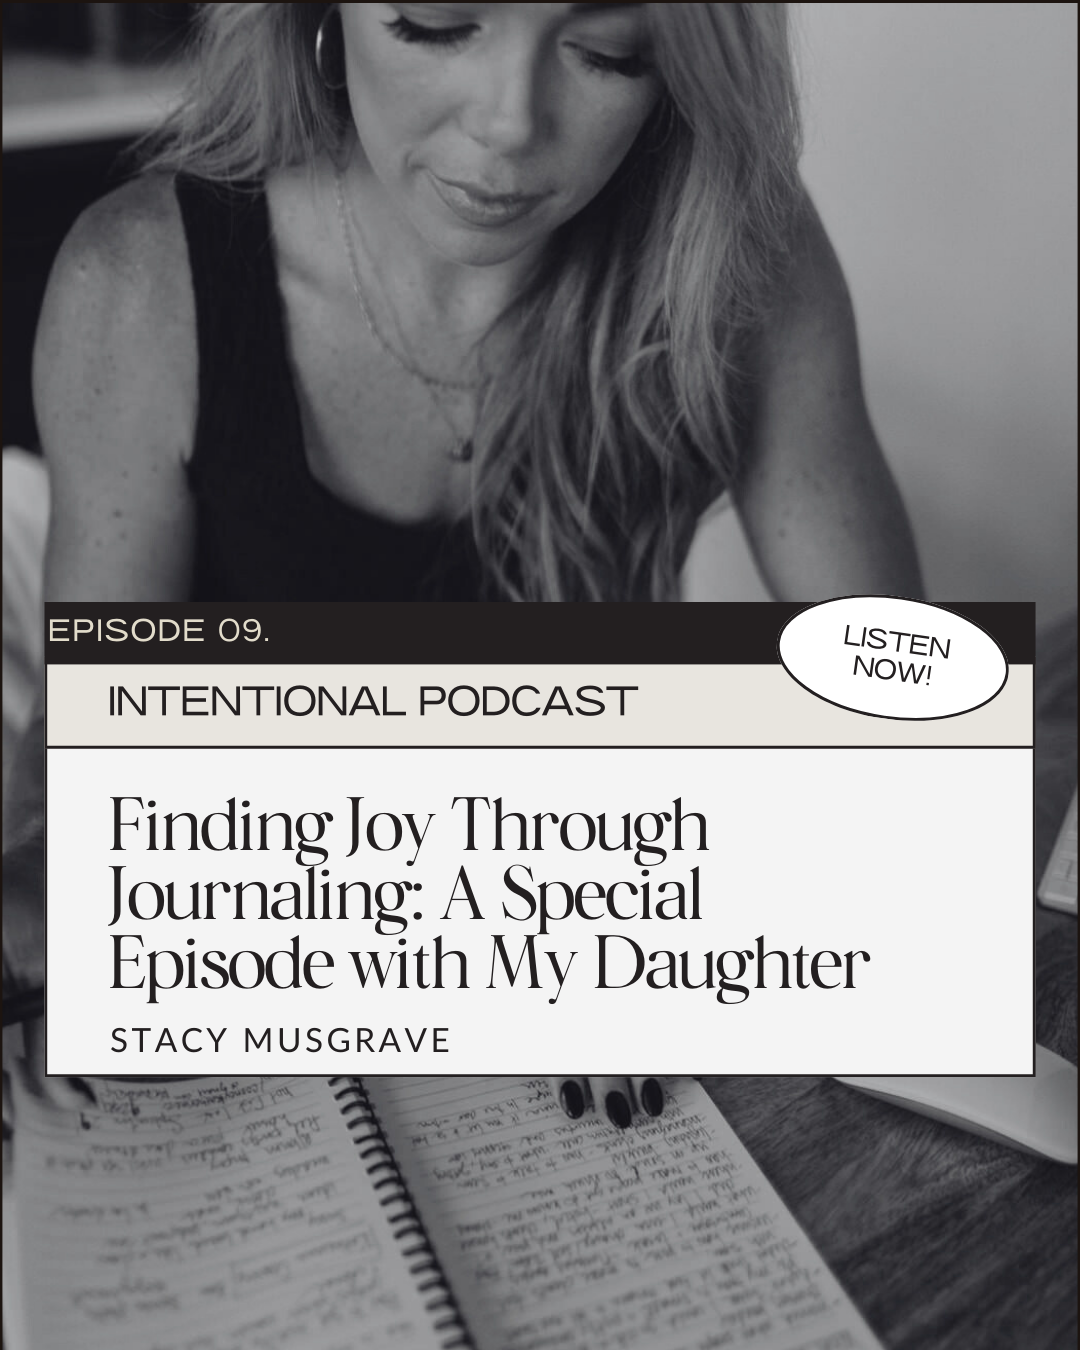 Finding Joy Through Journaling: A Special Episode with My Daughter